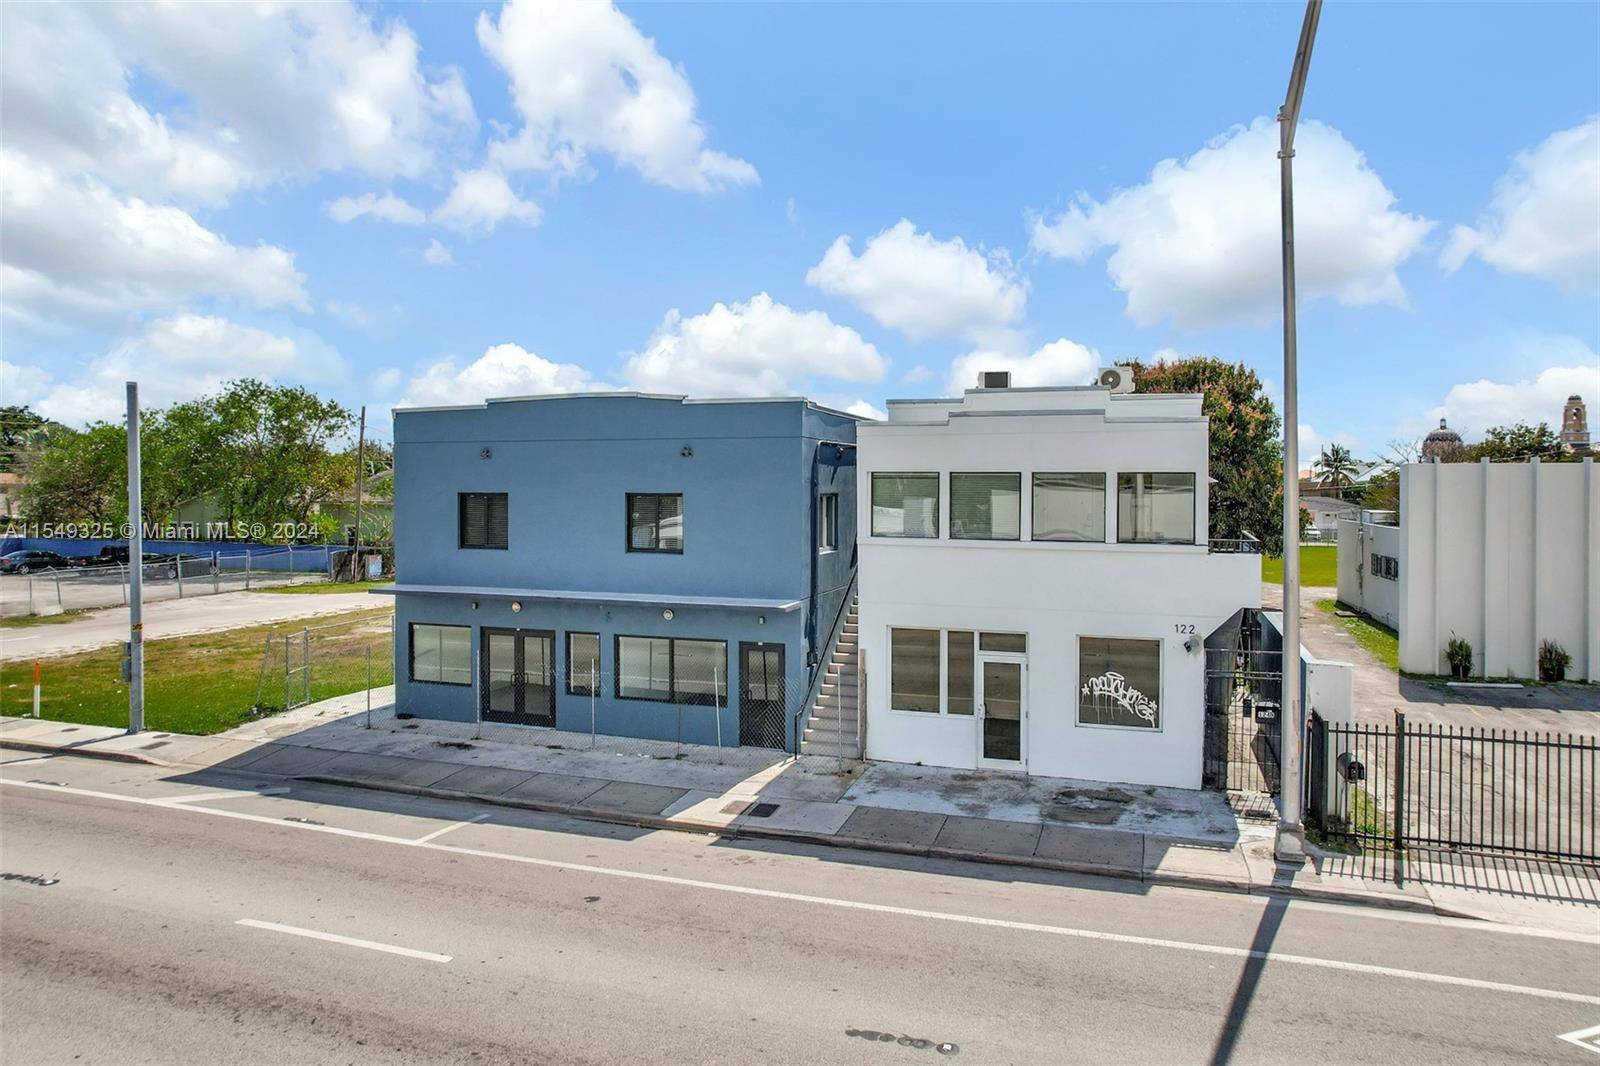 Introducing 122 NW 79th St, a newly renovated commercial property.